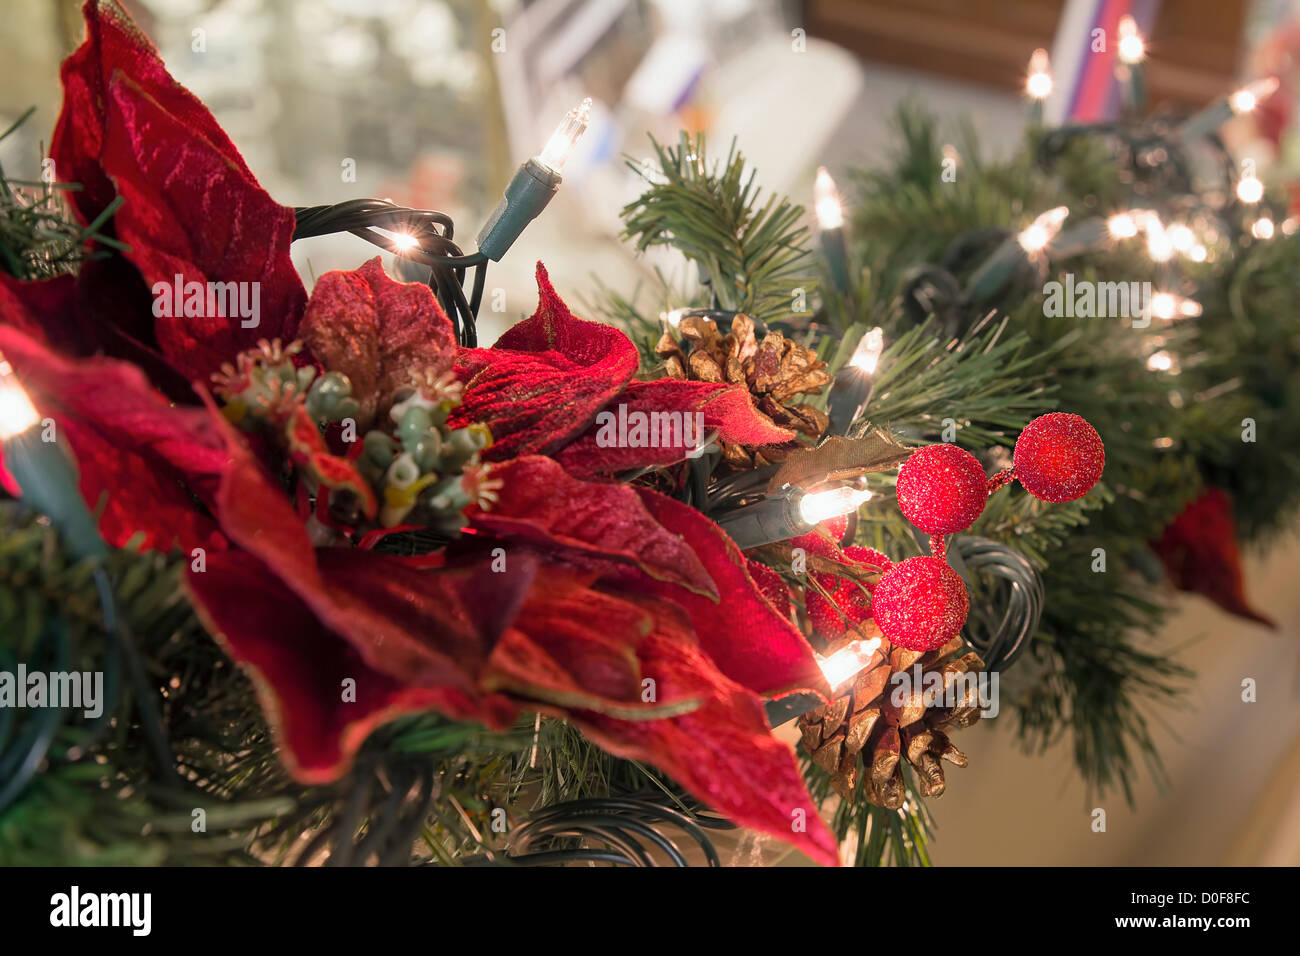 Christmas Decoration Garland with Poinsettia Pine Cones and Lights on Staircase Stock Photo